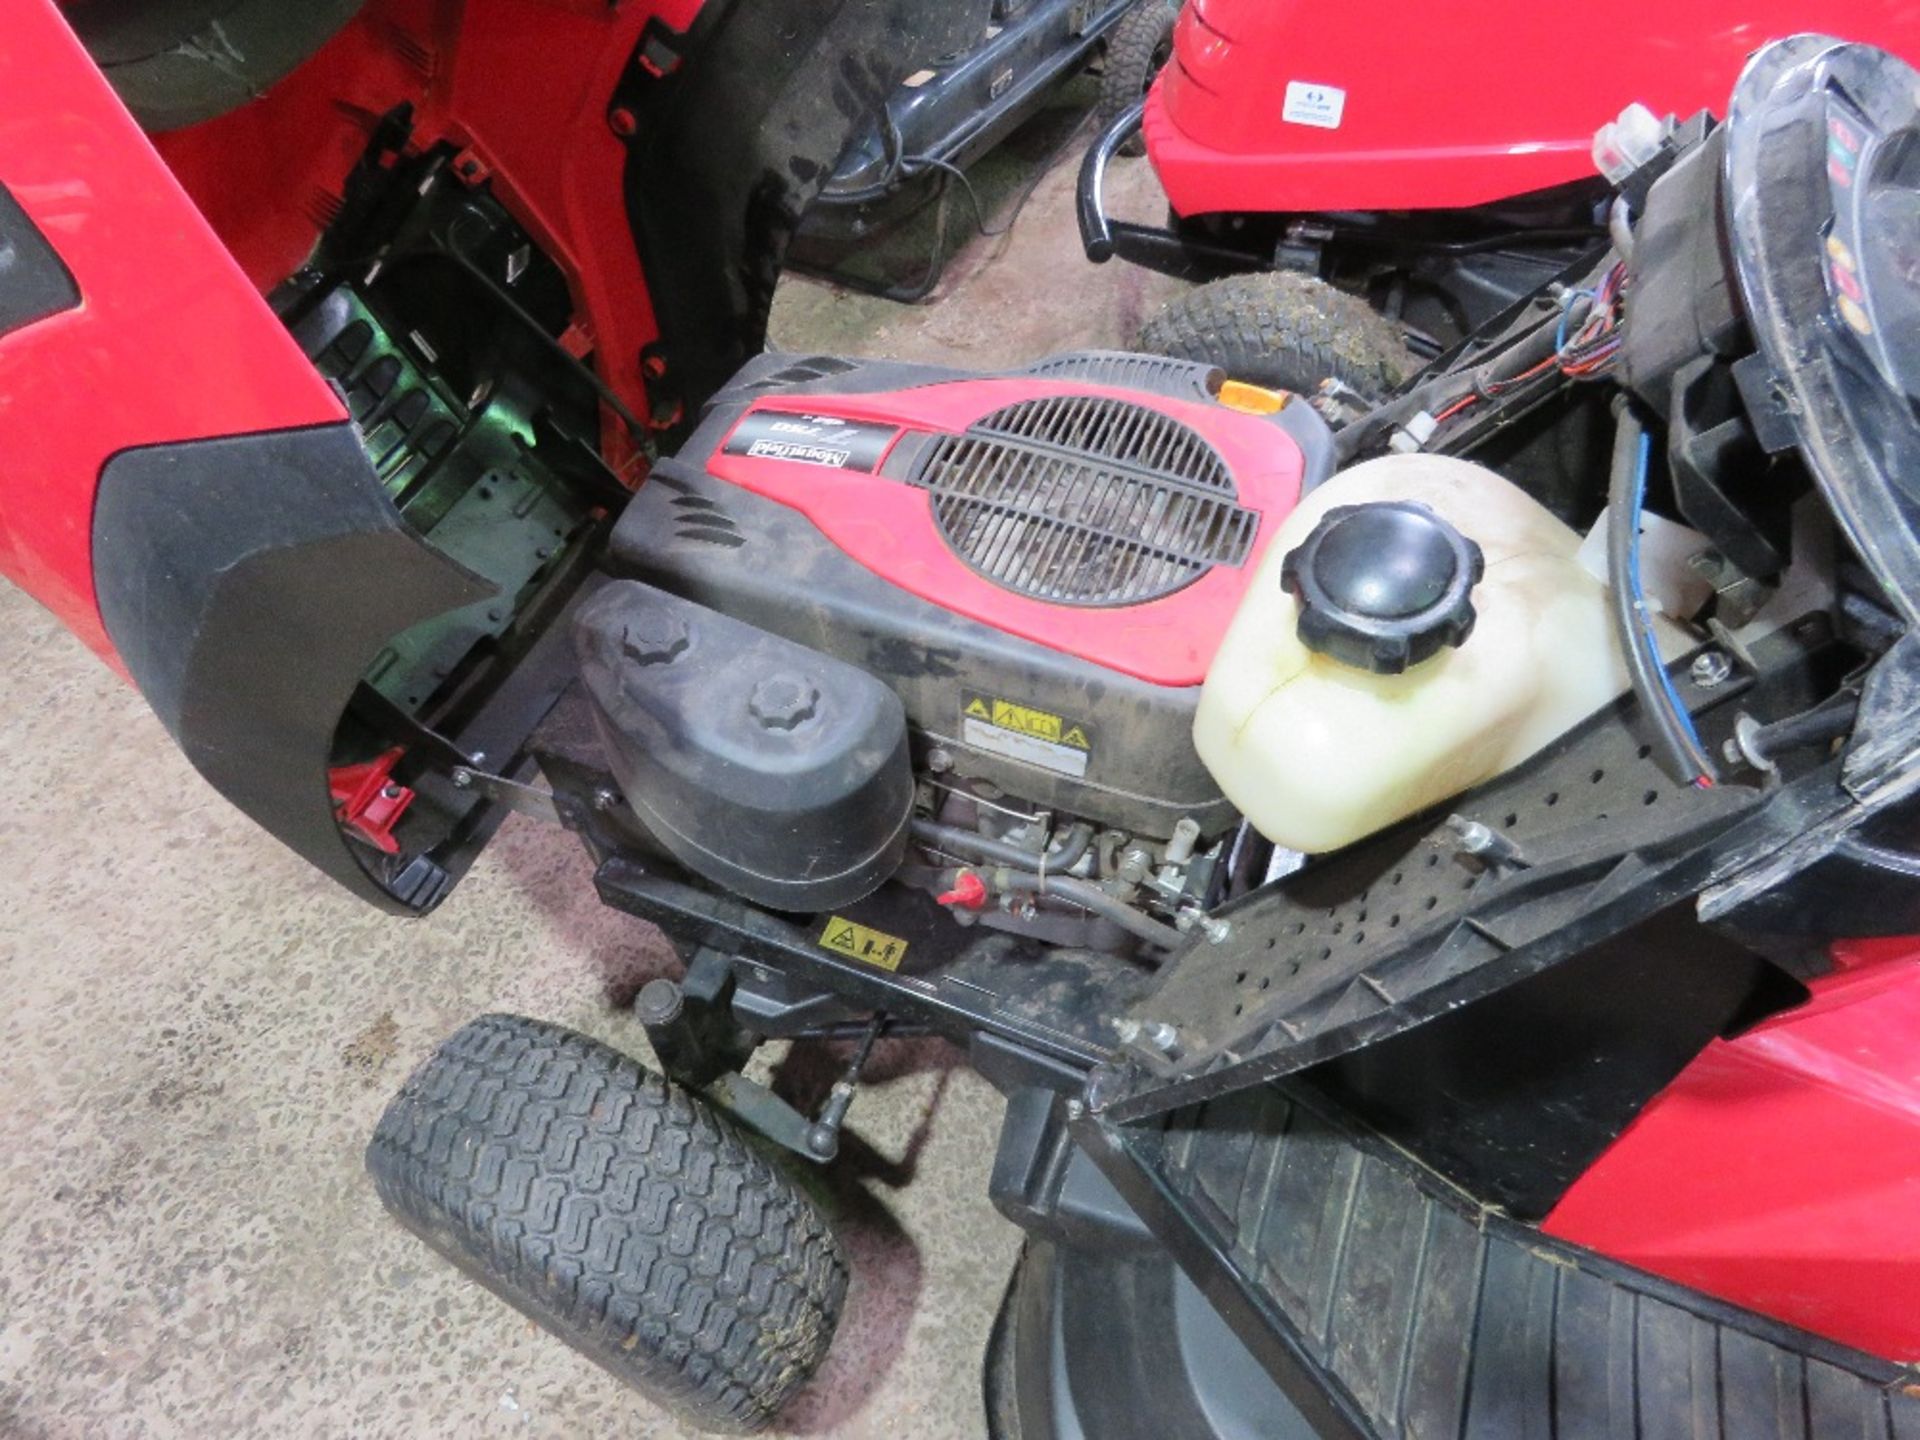 MOUNTFIELD 1636M RIDE ON MOWER WITYH COLLECTOR. WHEN TESTED WAS SEEN TO RUN AND MOWERS ENGAGED BUT D - Image 9 of 9